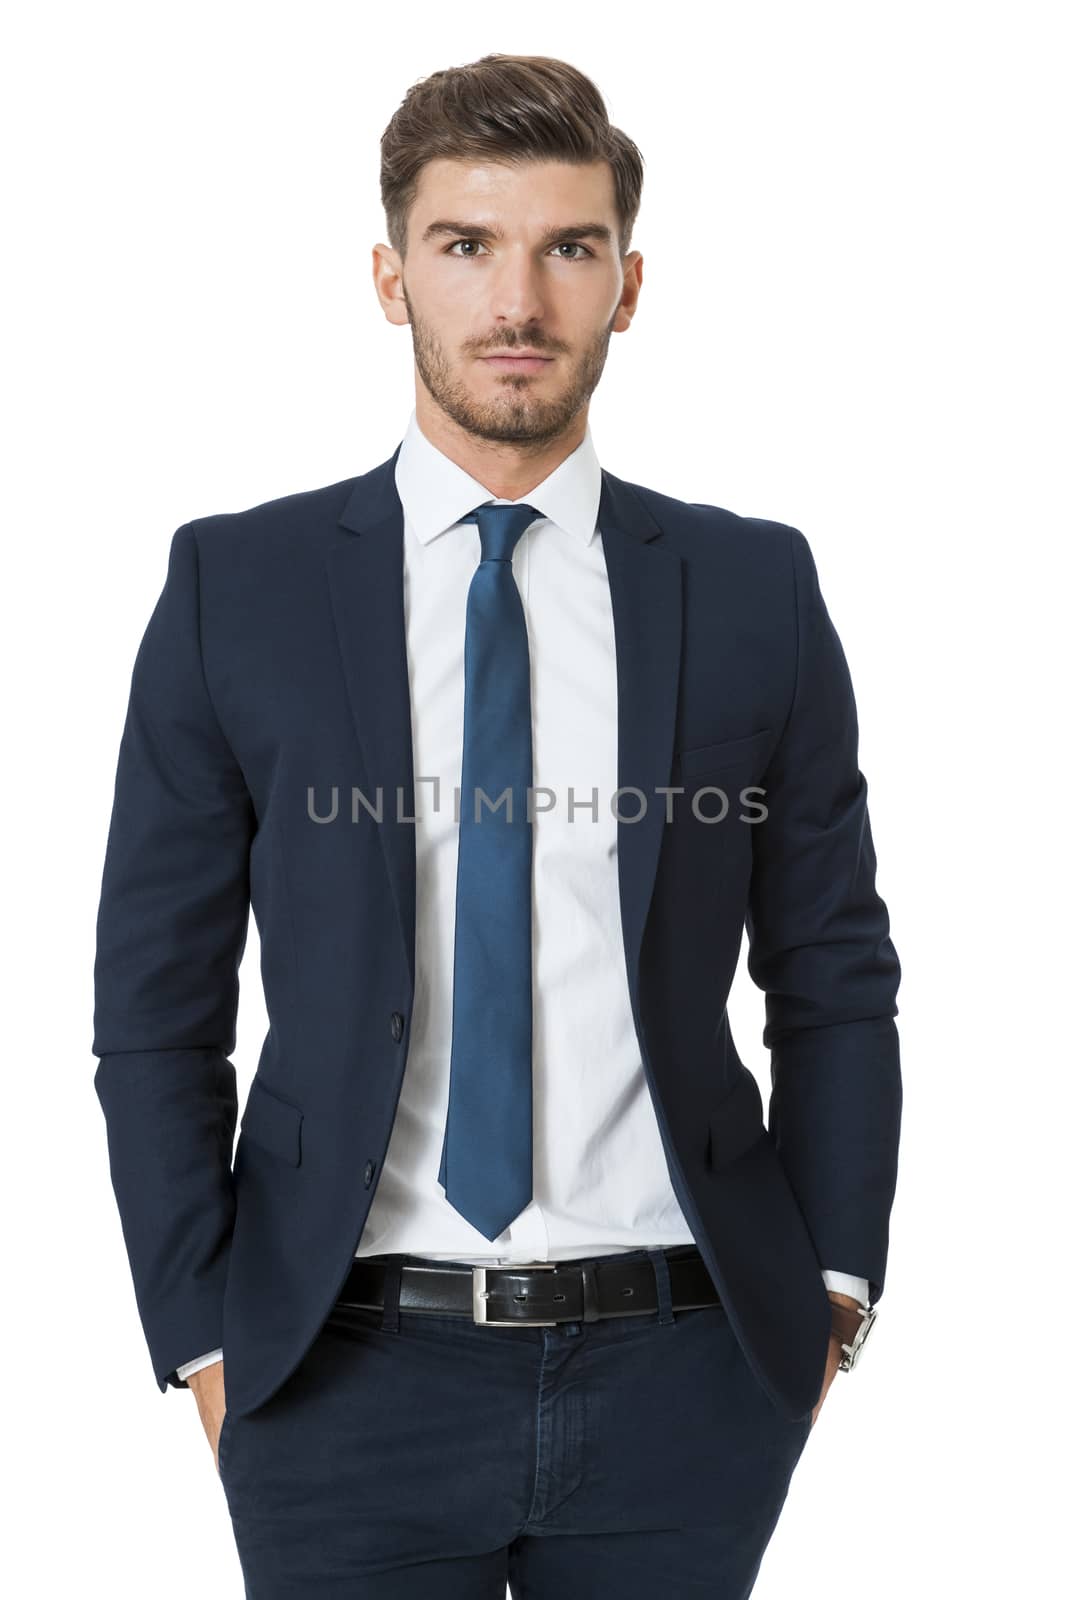 Stylish successful handsome young businessman standing in a relaxed pose with his hands in his pockets and his suit jacket open, isolated on white